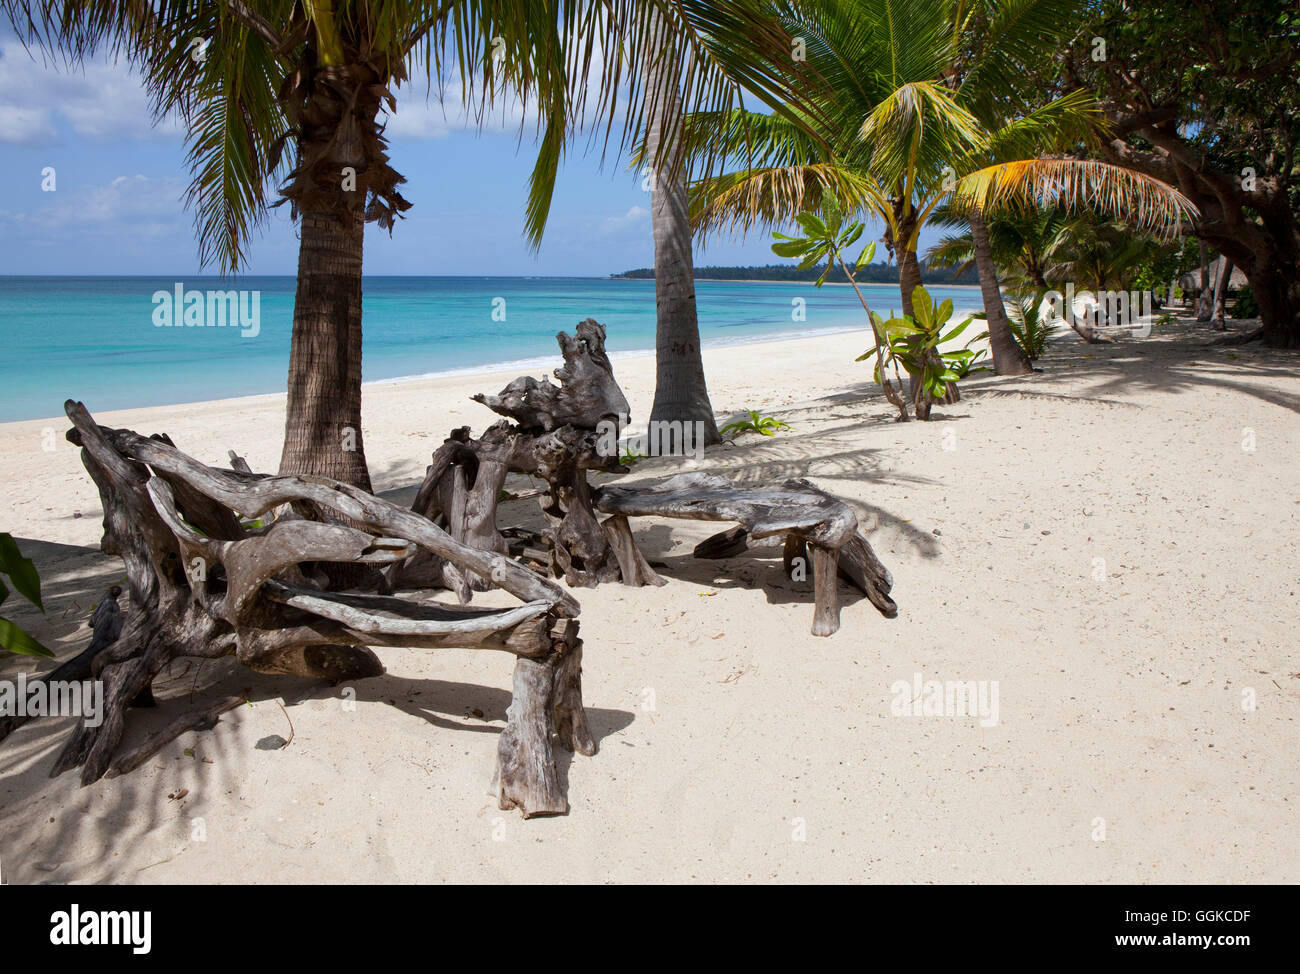 Driftwood and palm trees on the tropical beach Saud Beach in Pagudpud, Ilocos Norte province on the main island Luzon, Philippin Stock Photo